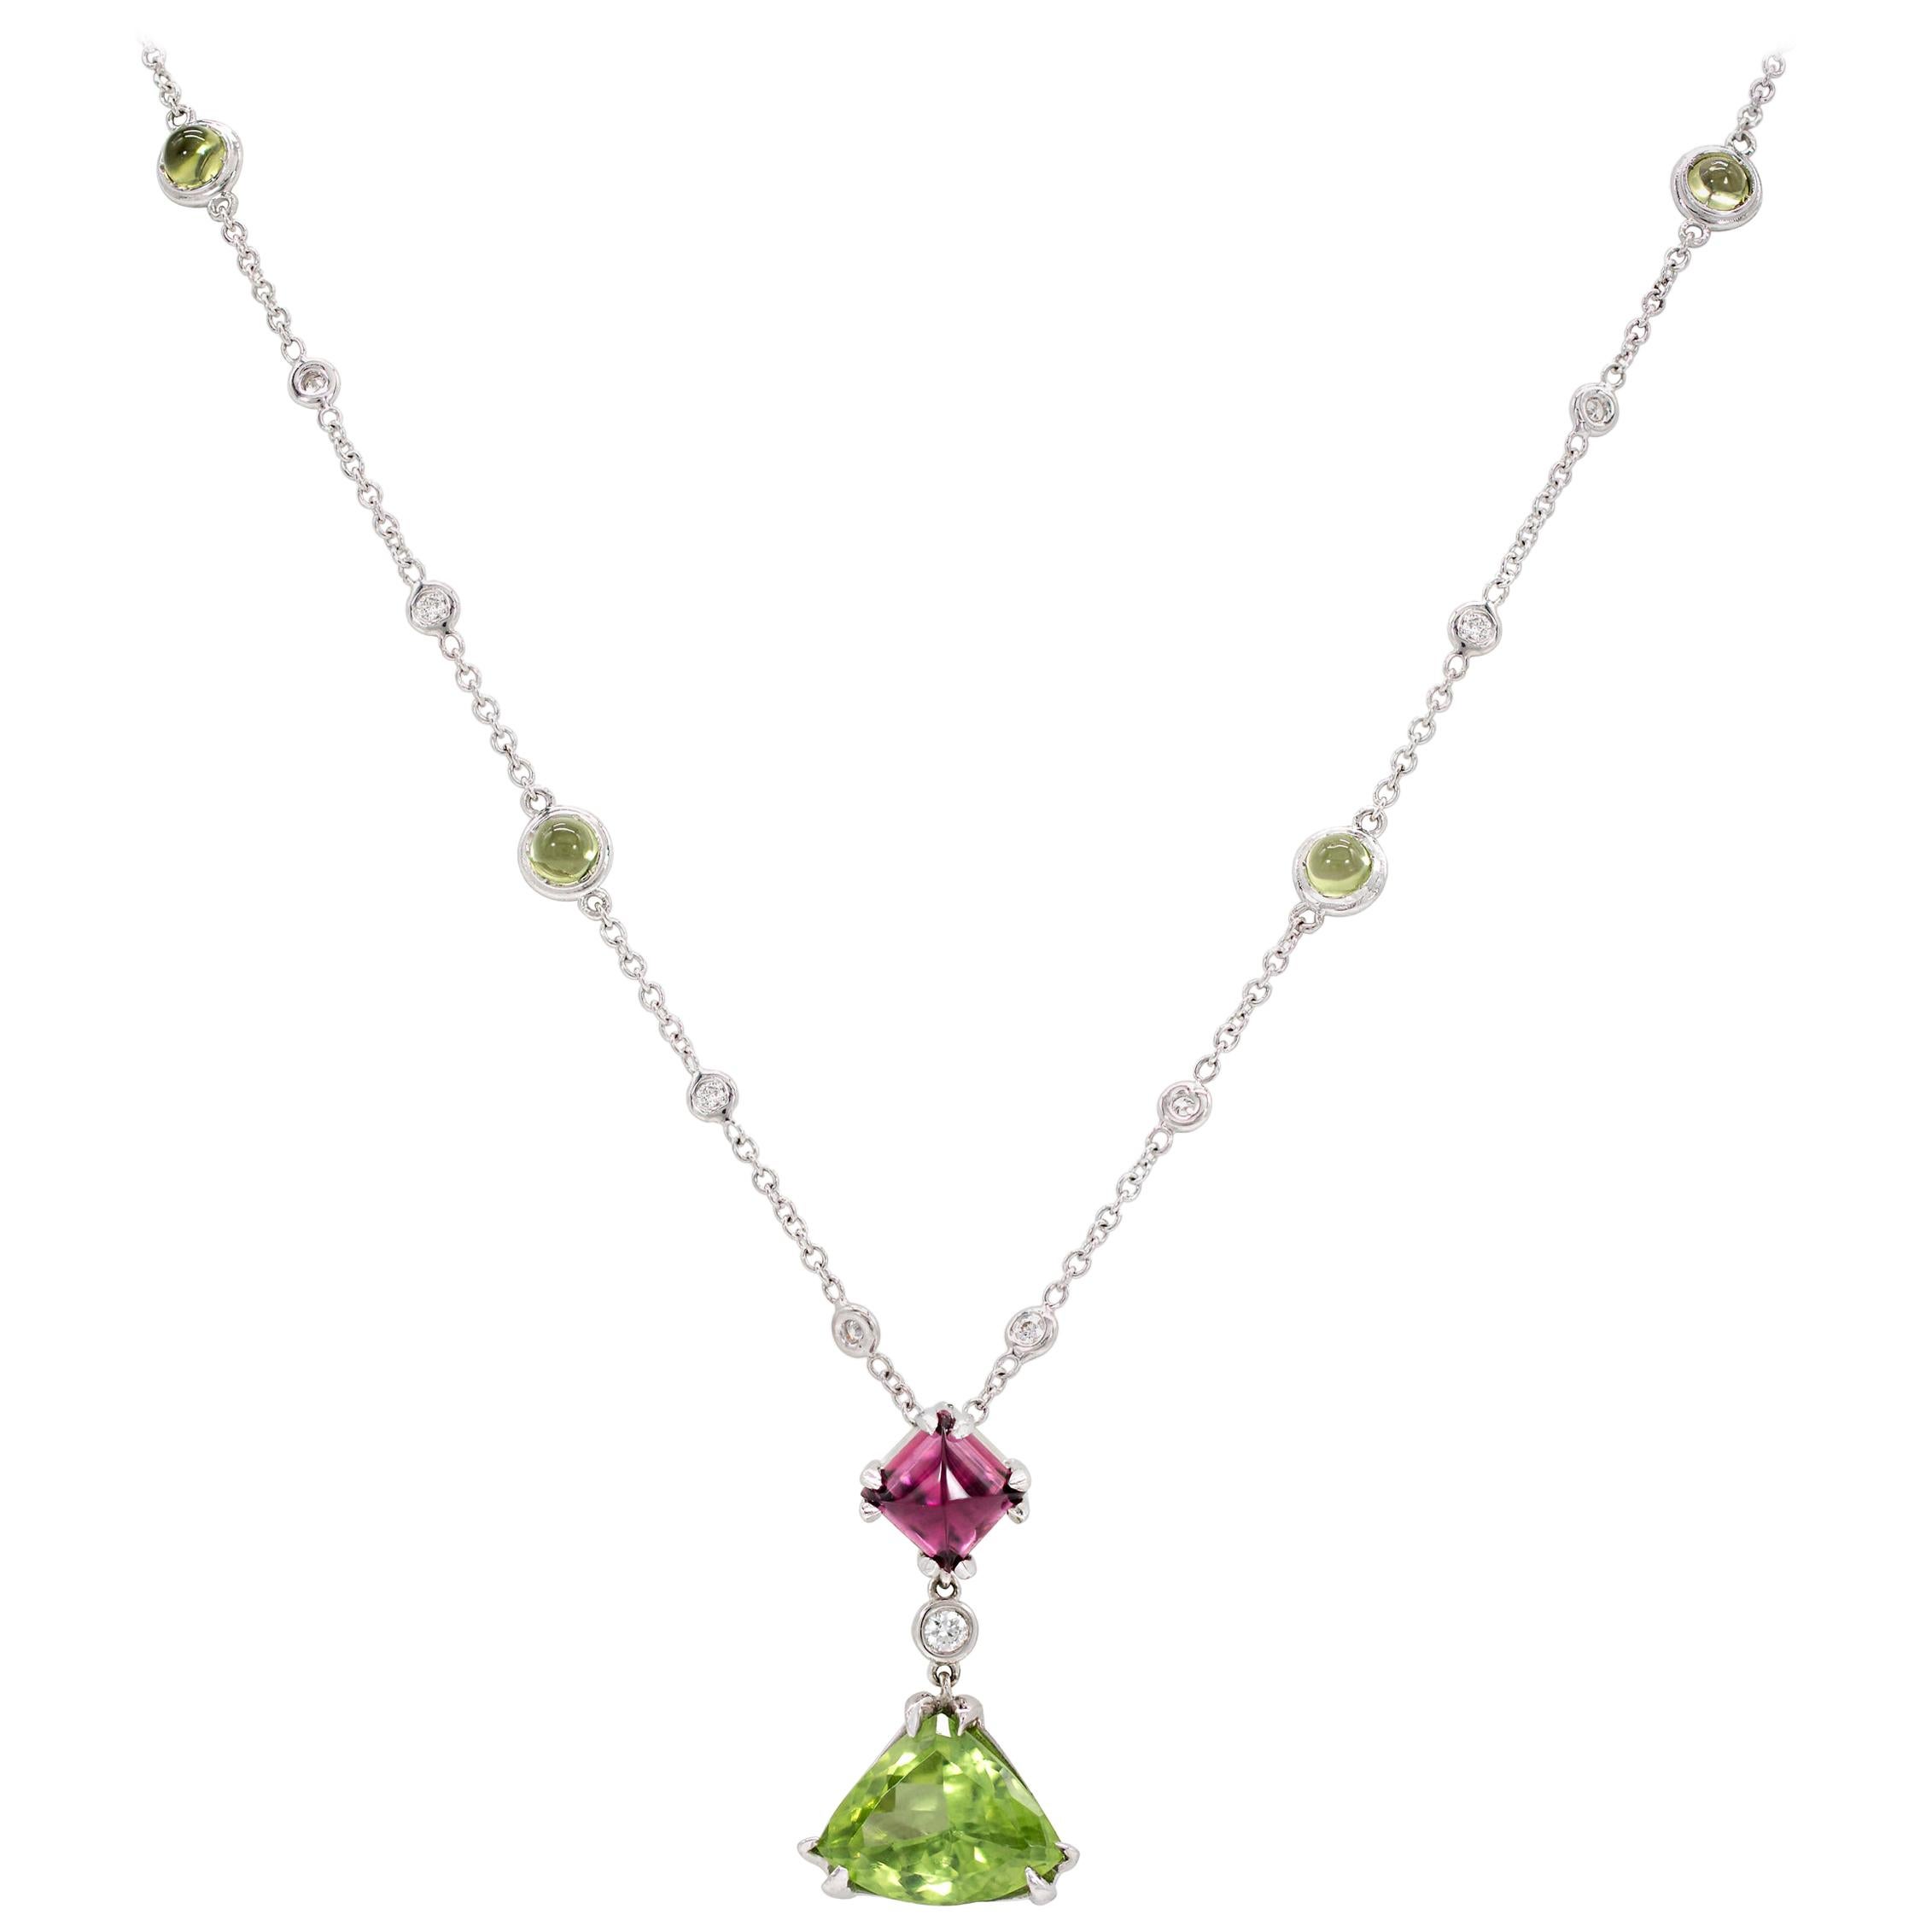 5.57 Carat Sugarloaf Rubellite Tourmaline, Peridot, and Diamond Necklace in 18K For Sale